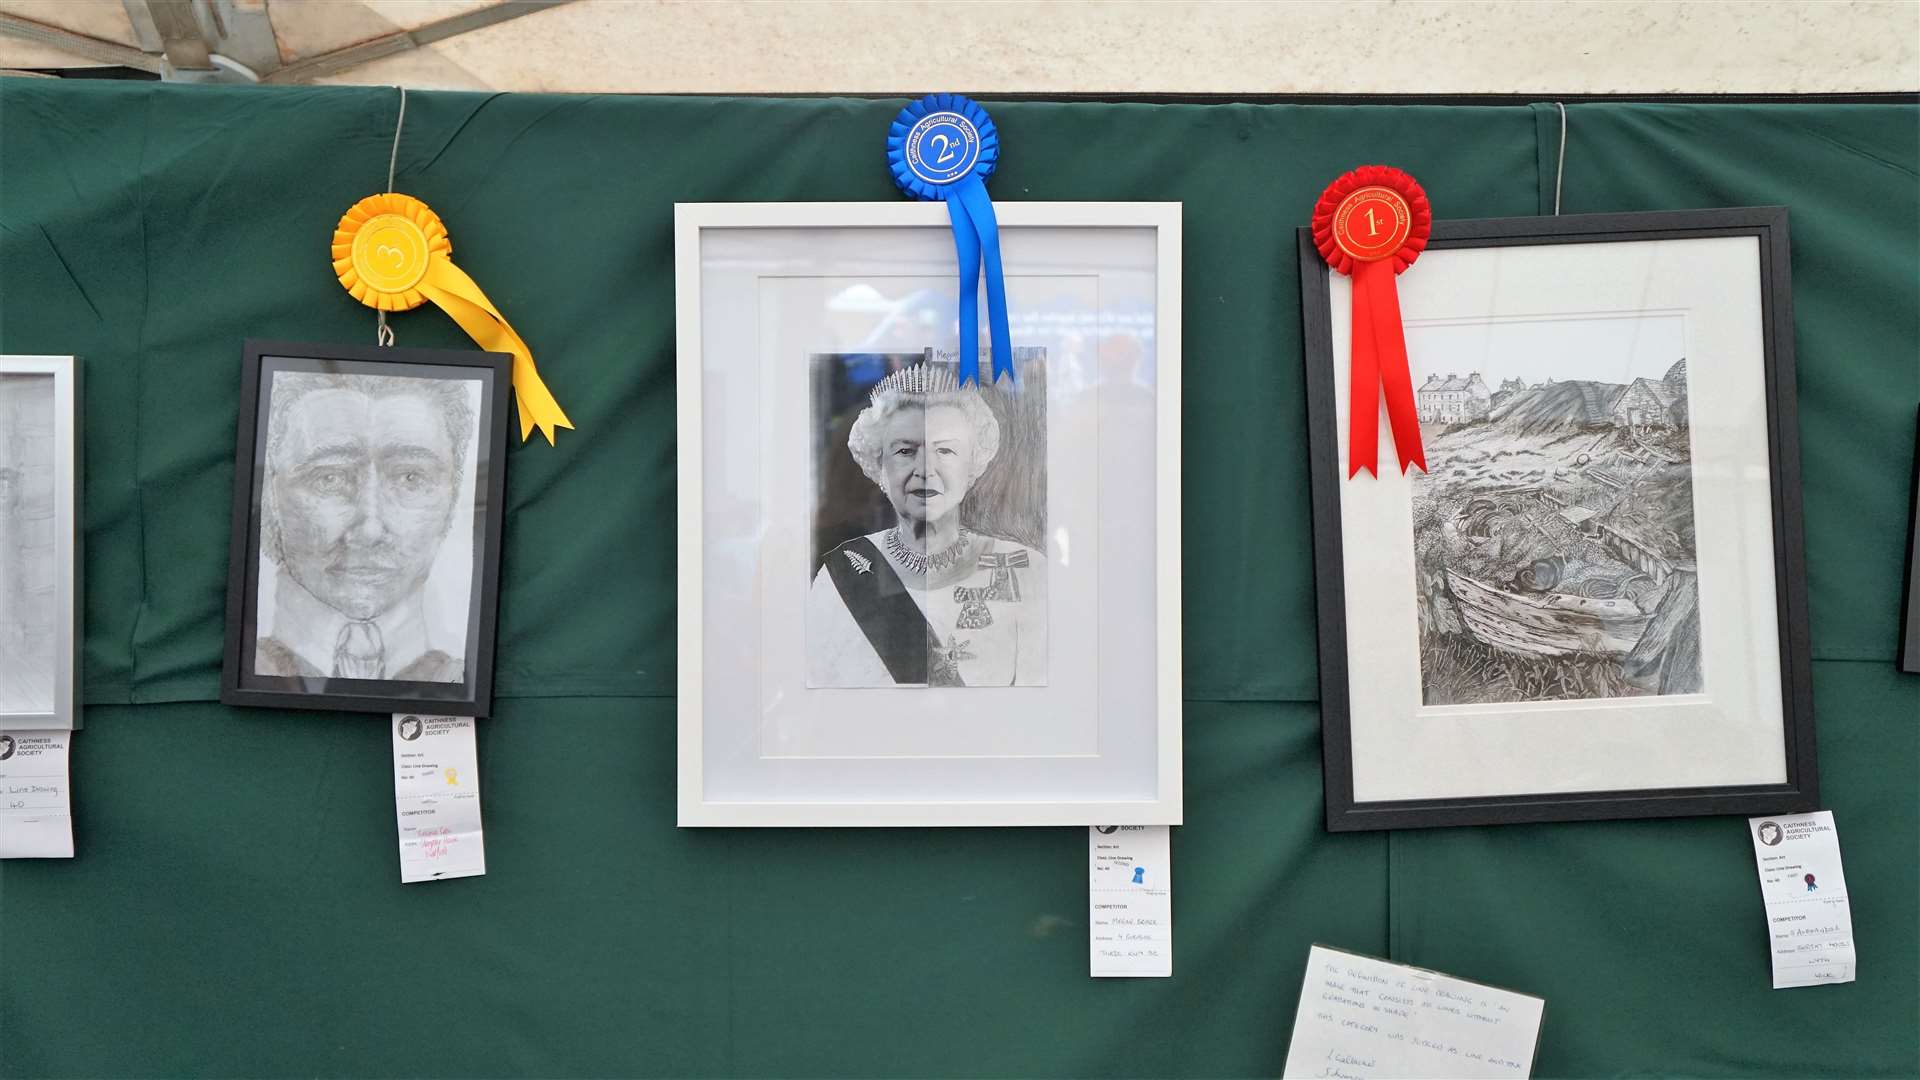 County Show 2022 in Thurso. Picture: DGS